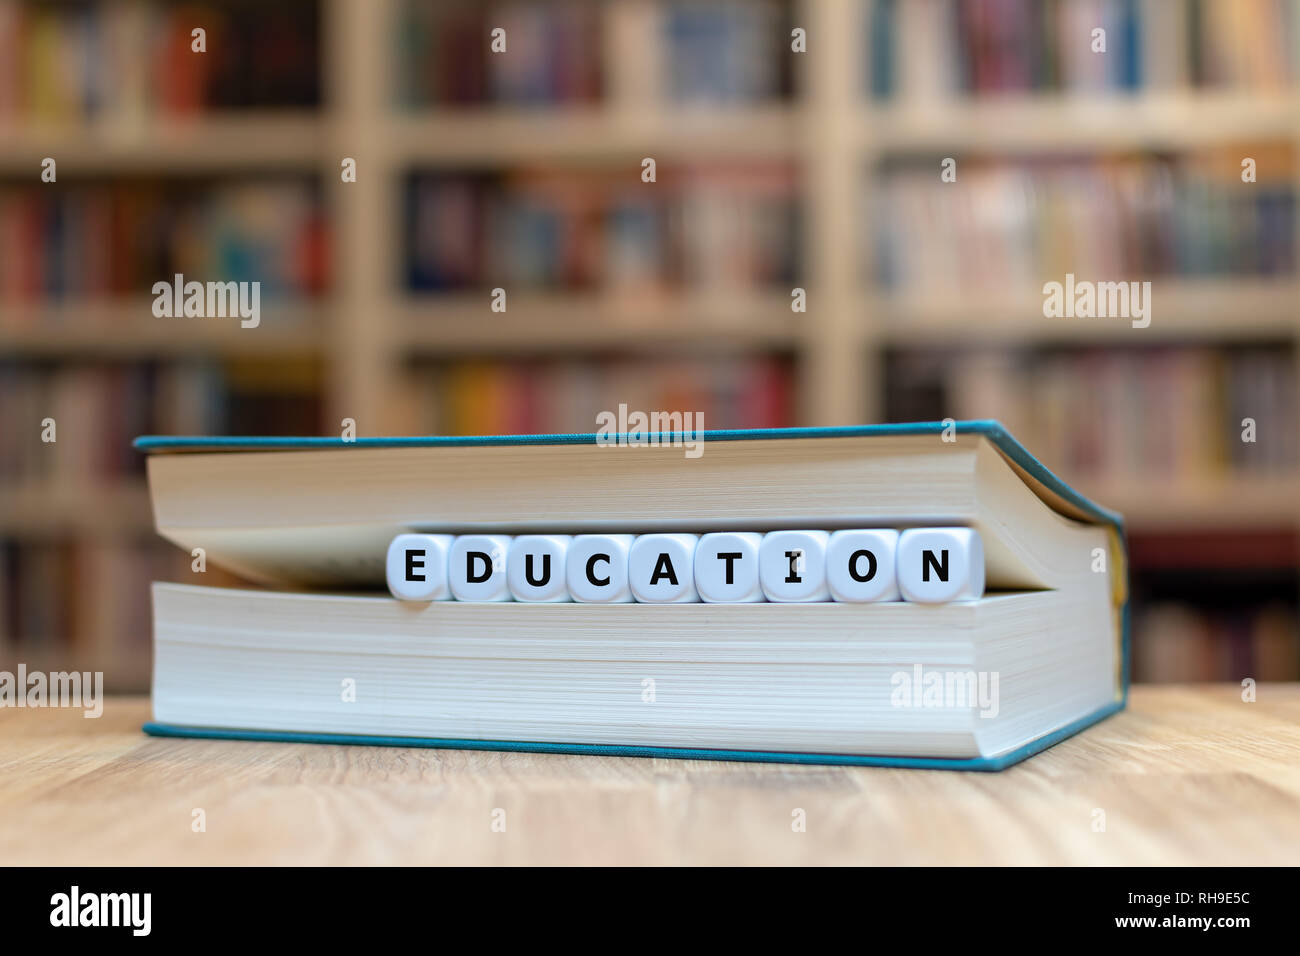 Dice in a book form the word 'EDUCATION'. Book is lying on a wooden table in a library. Stock Photo